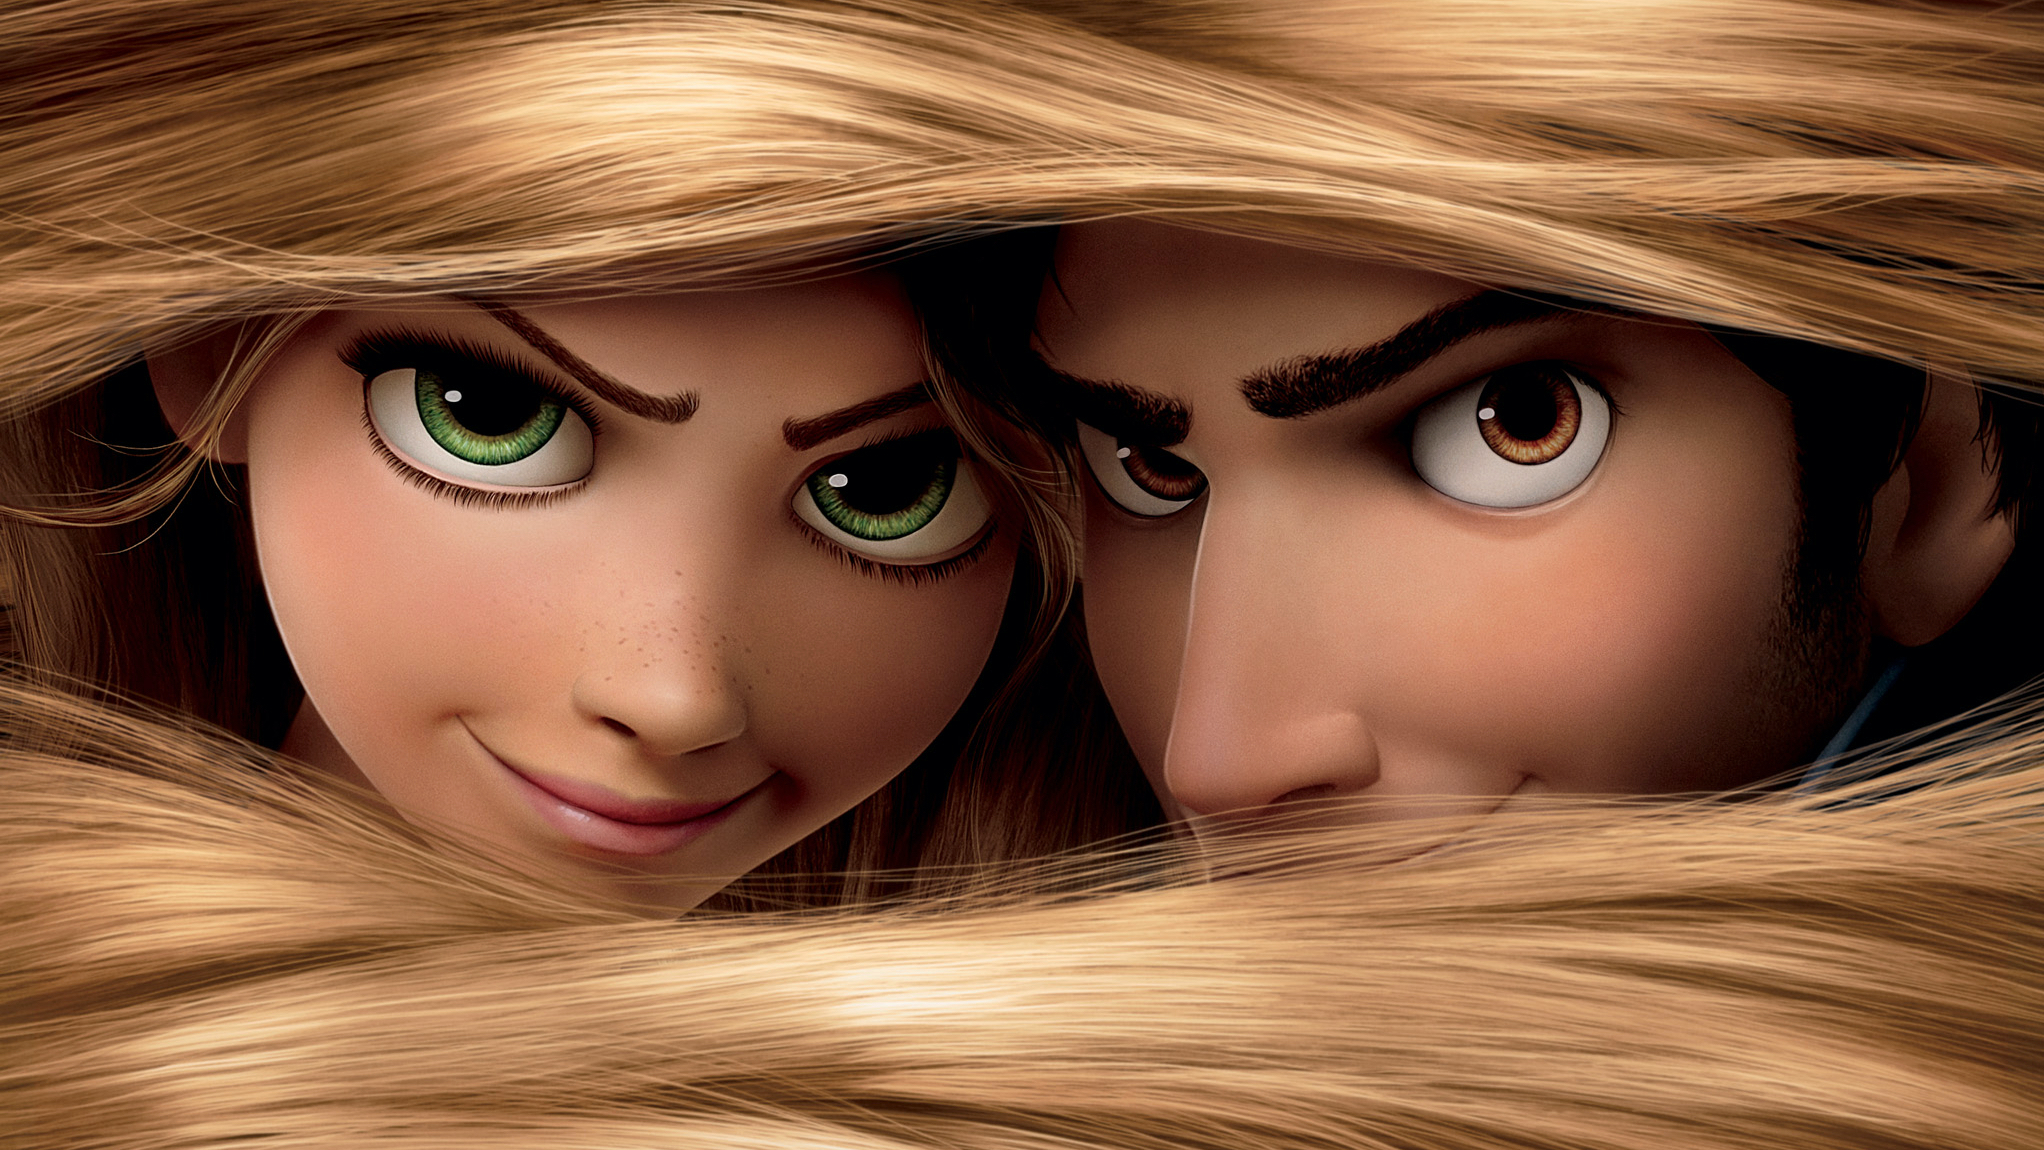 2044x1150 80+ Tangled HD Wallpapers and Backgrounds